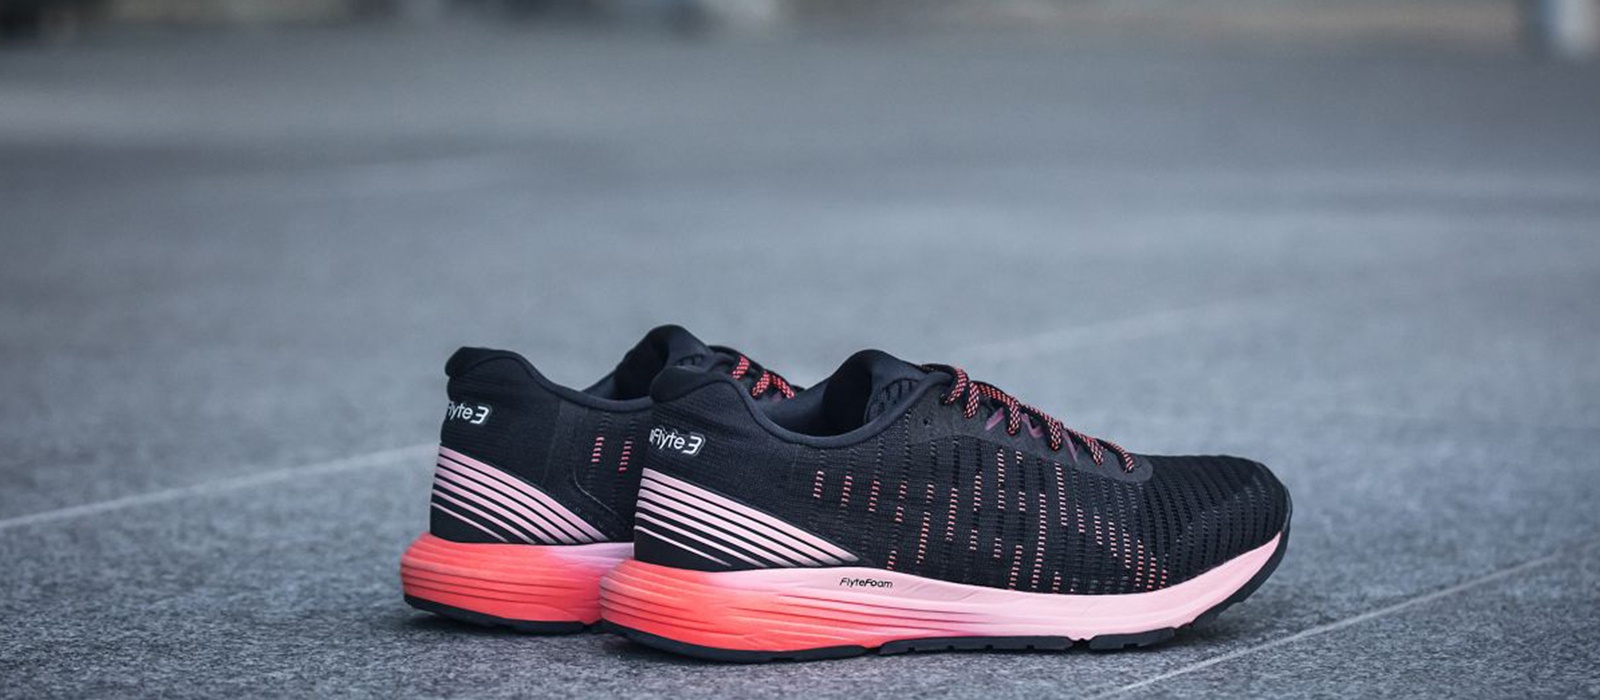 Women’s black and pink running shoes sitting on pavement.